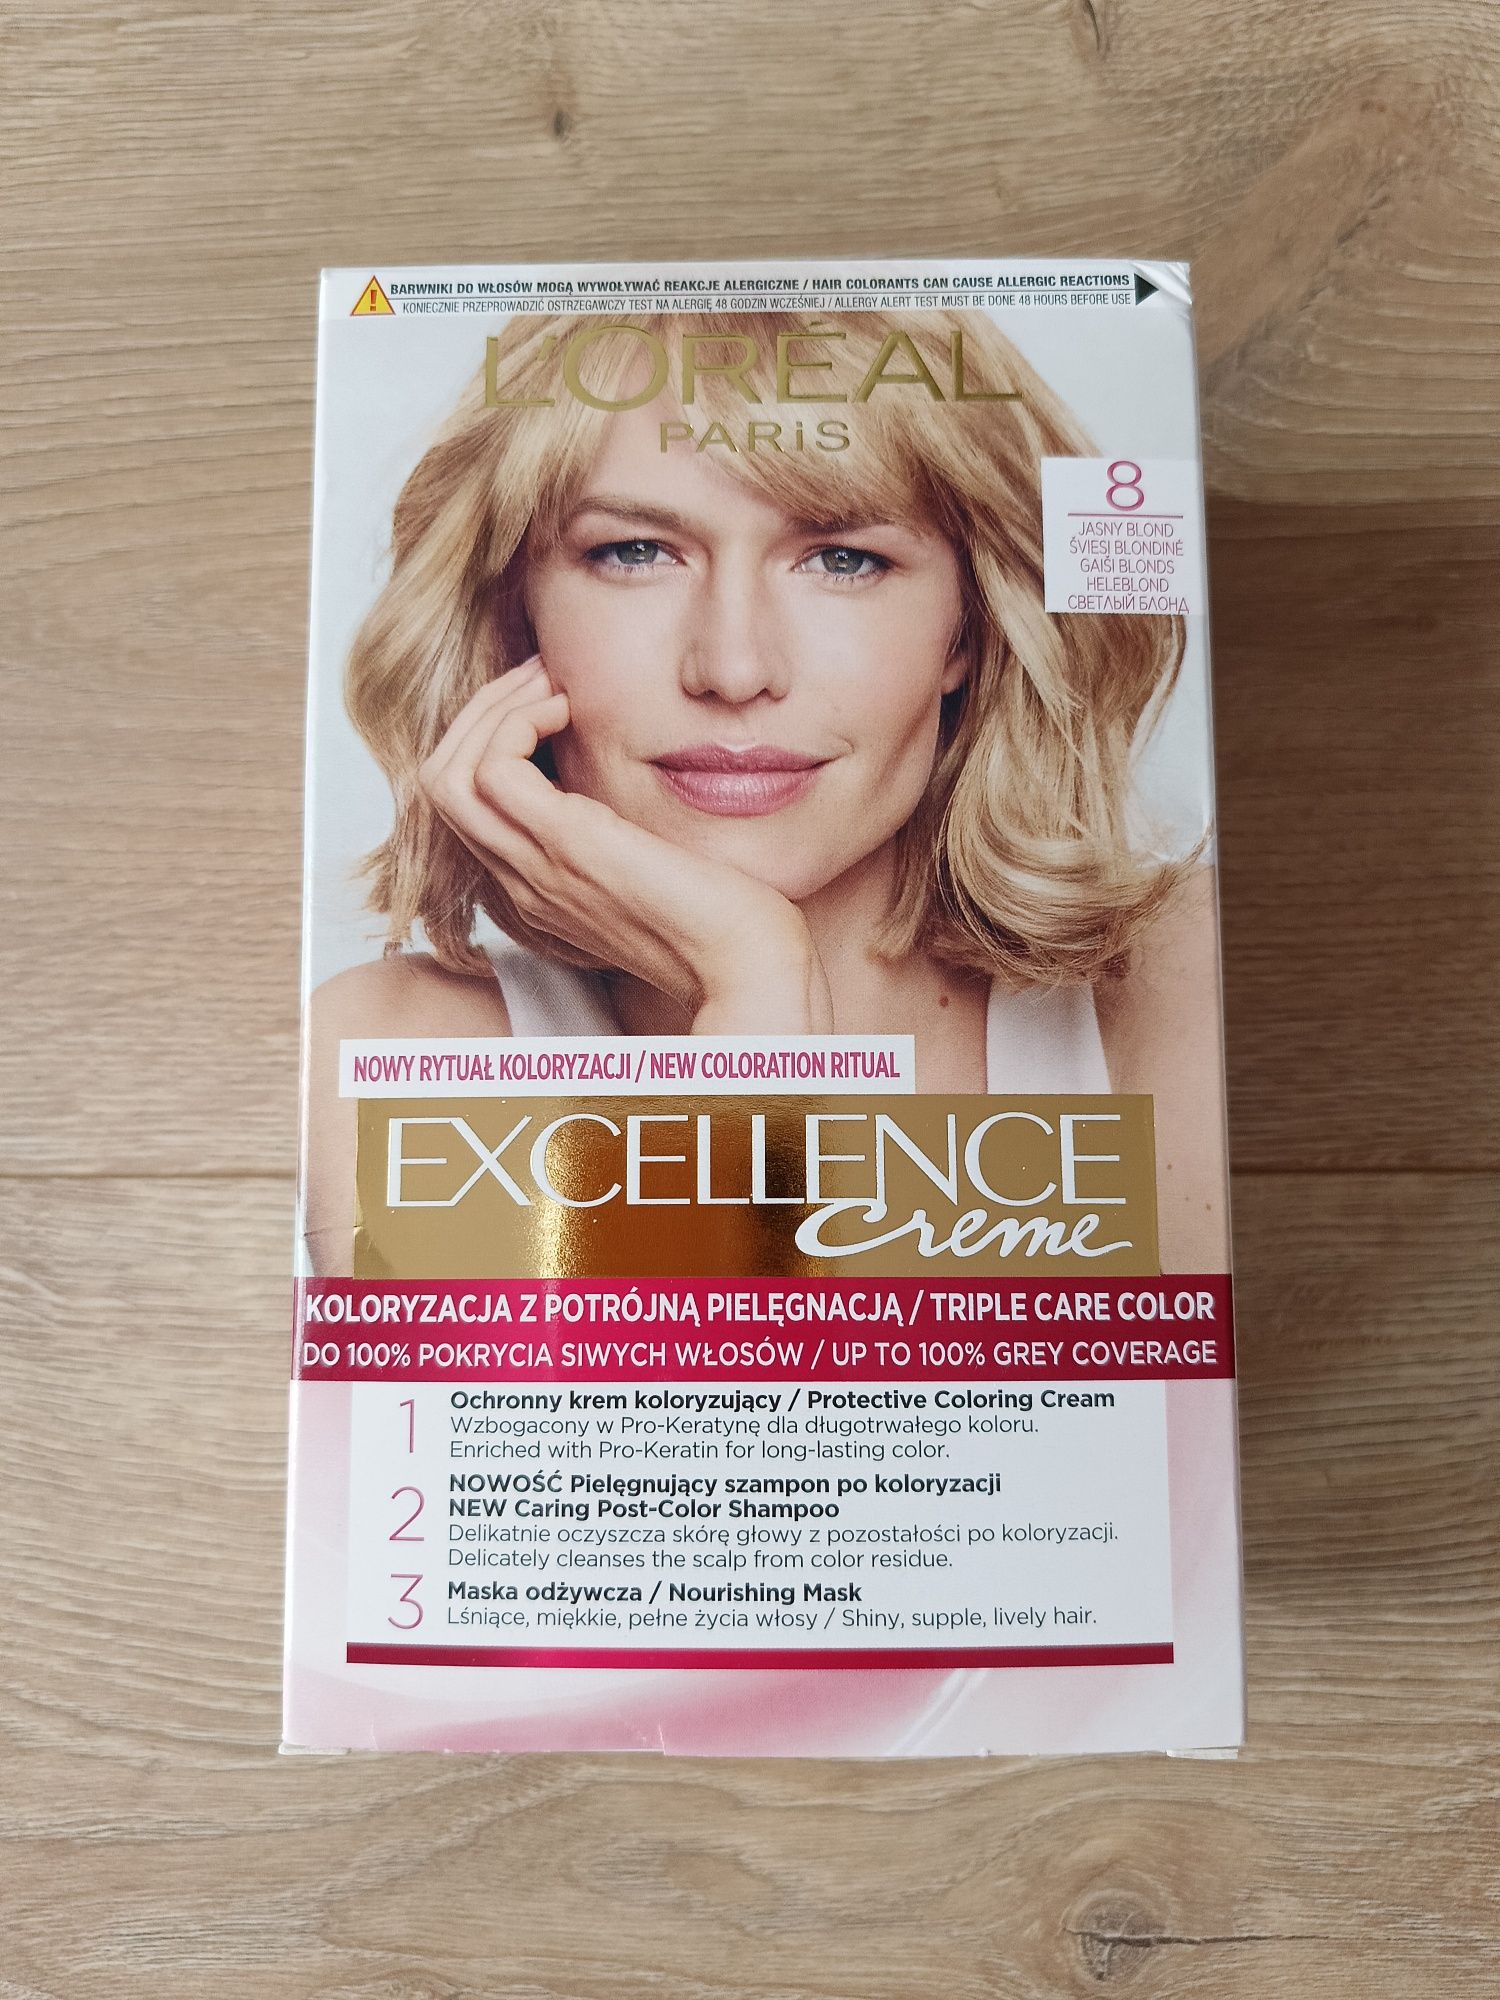 Farba Loreal excellence creme 8 jasny blond